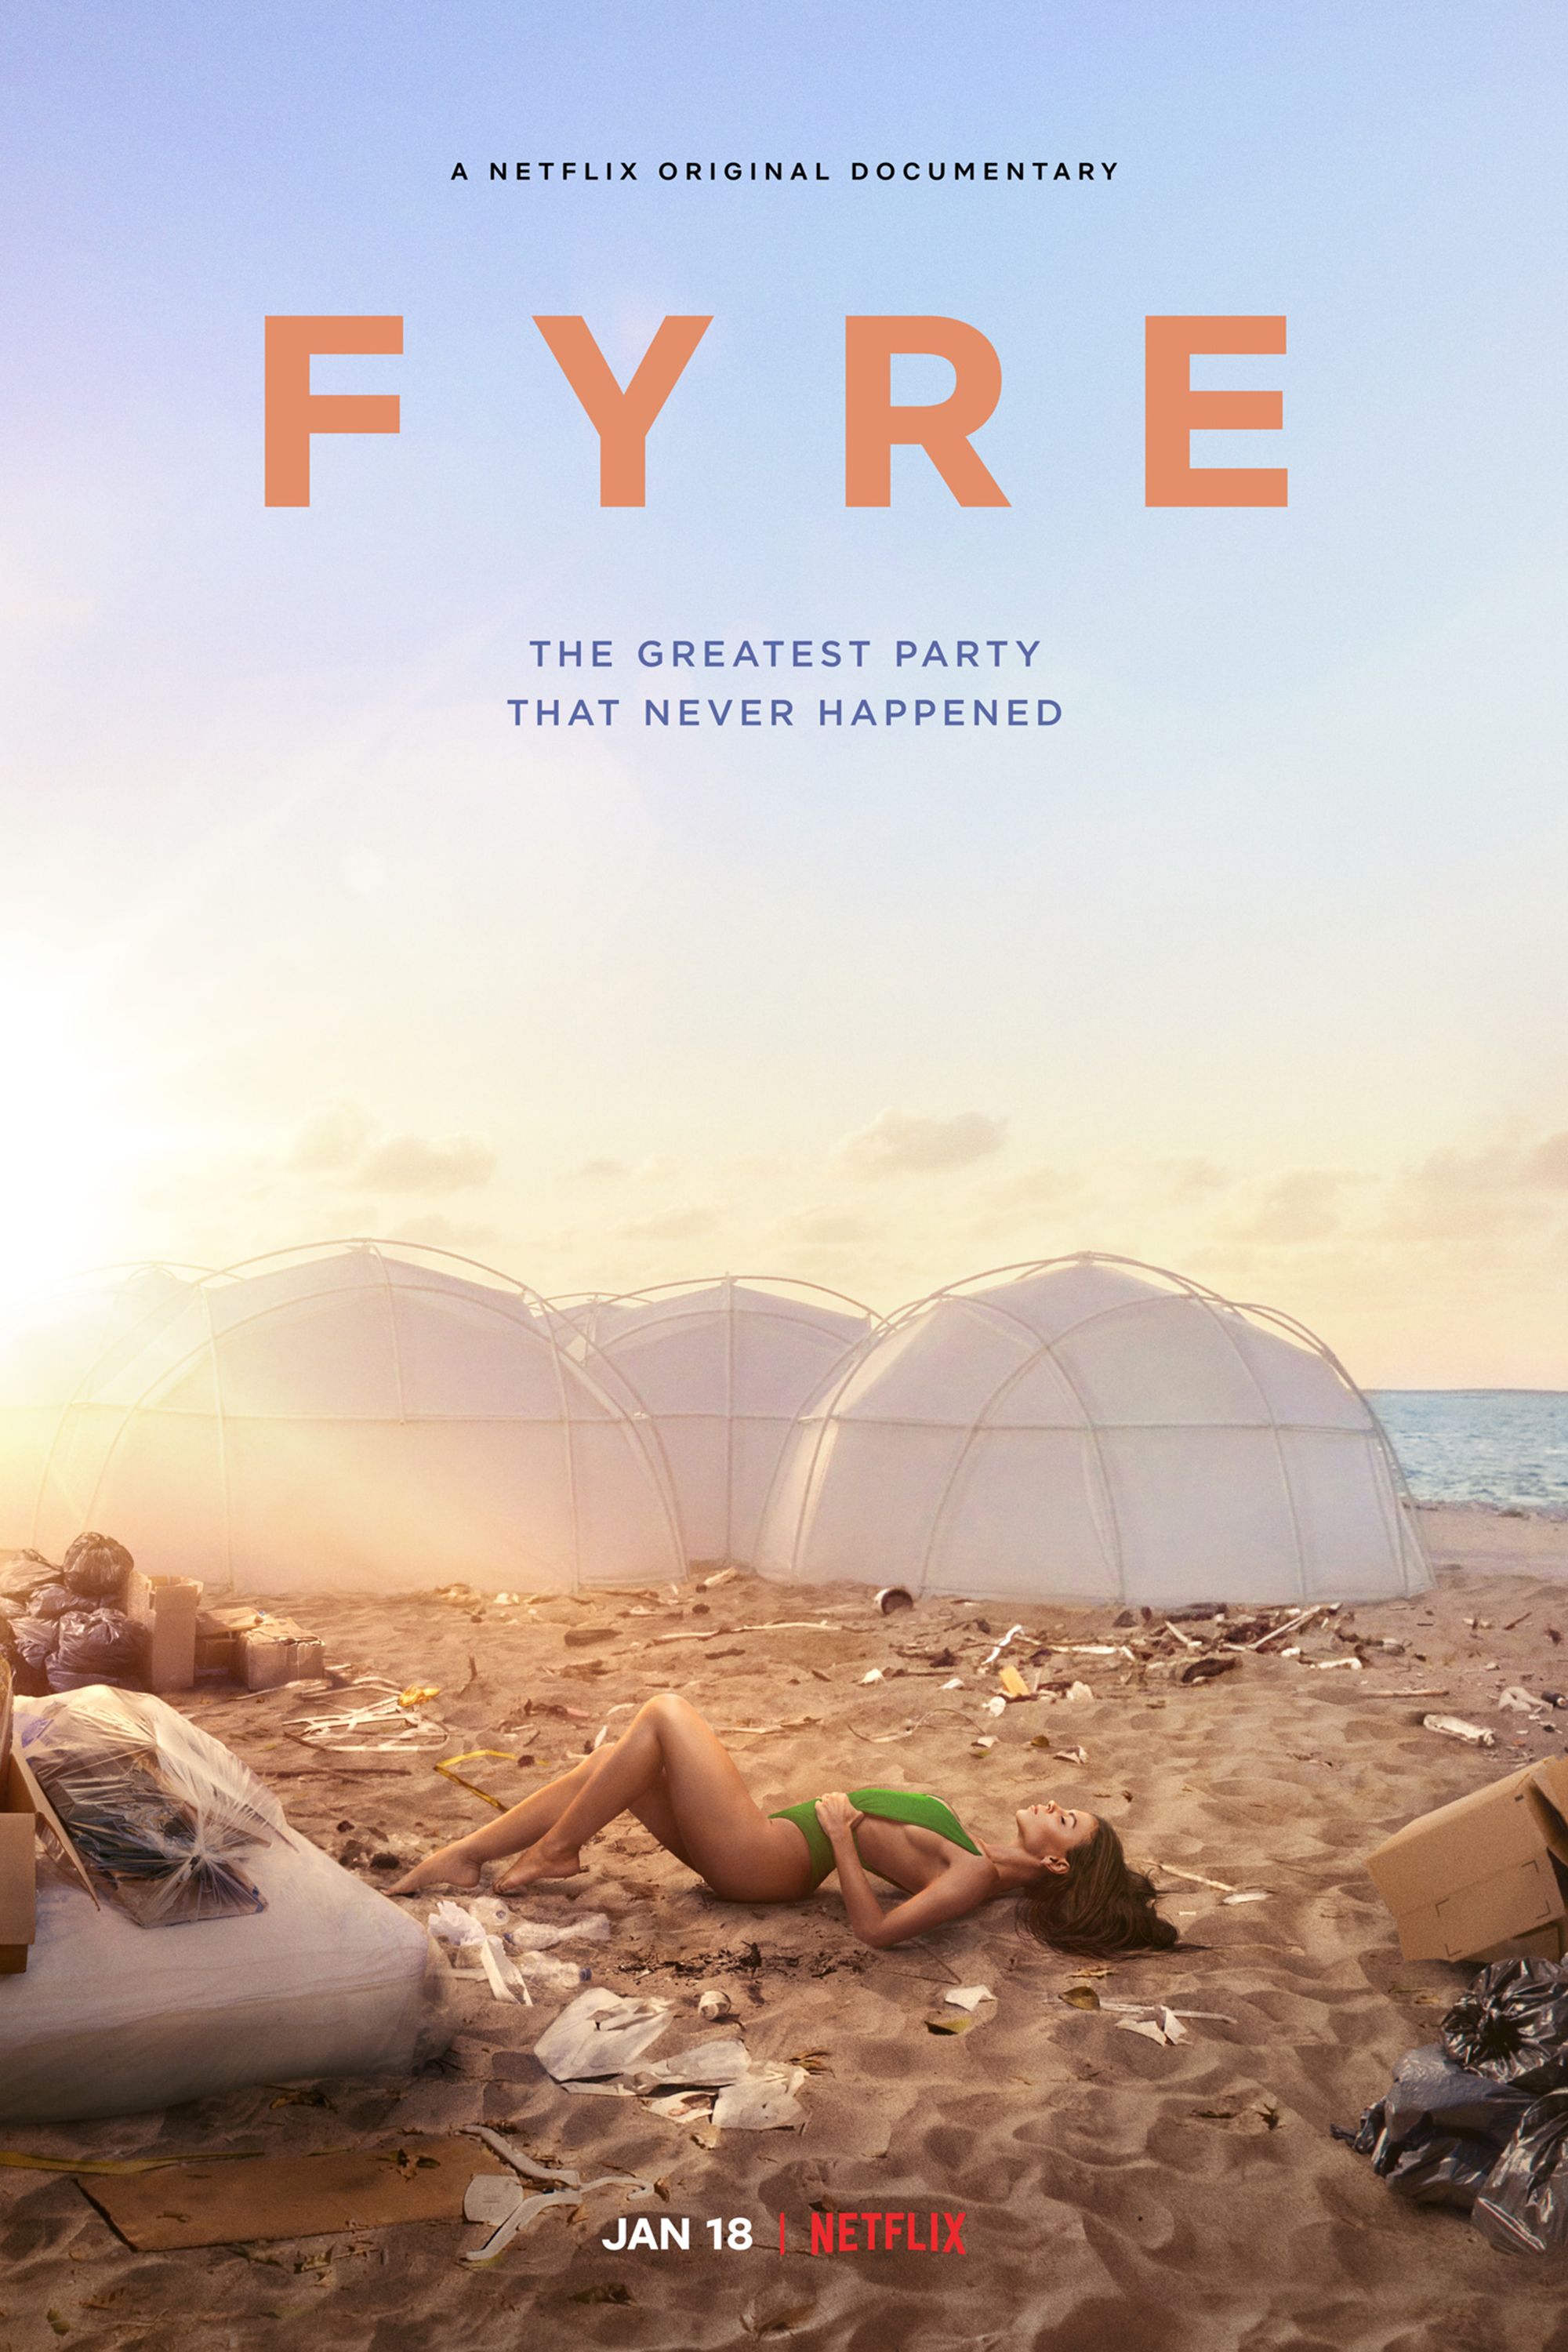 The trailer for Netflix's Fyre documentary is here